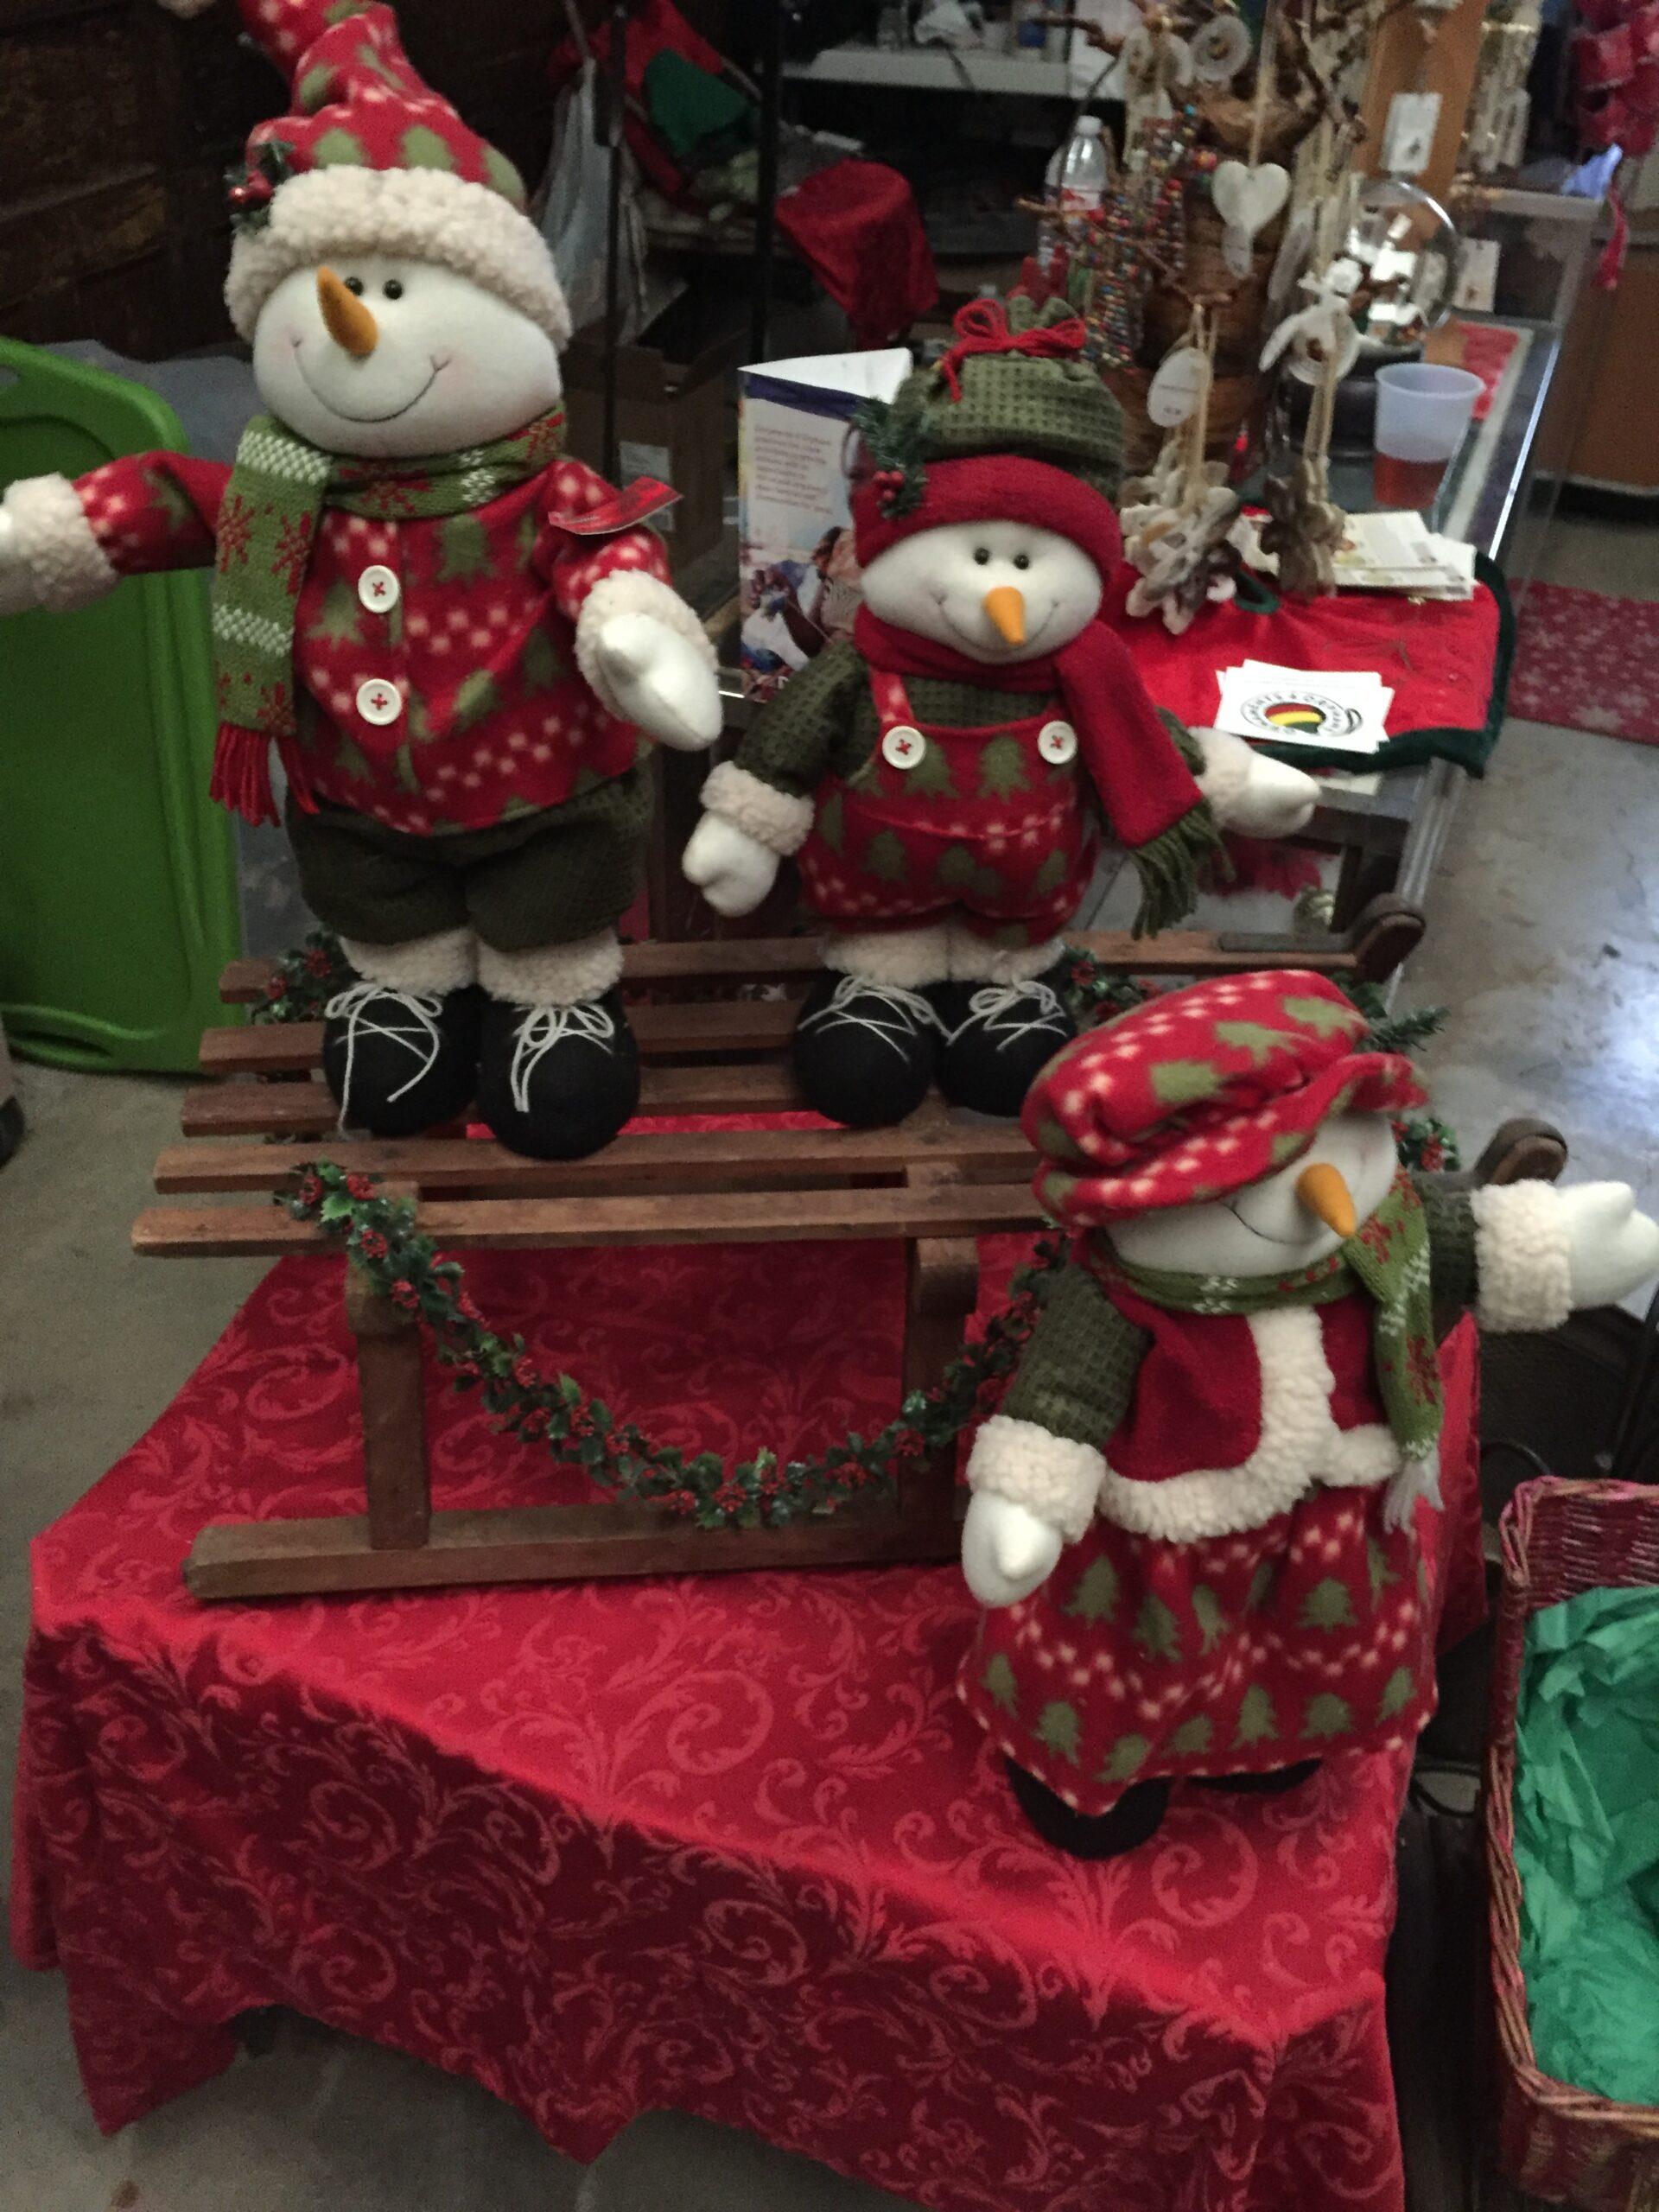 Three snowman decorations available in our gift shop at Haynie's Green Acres Christmas Tree Farm